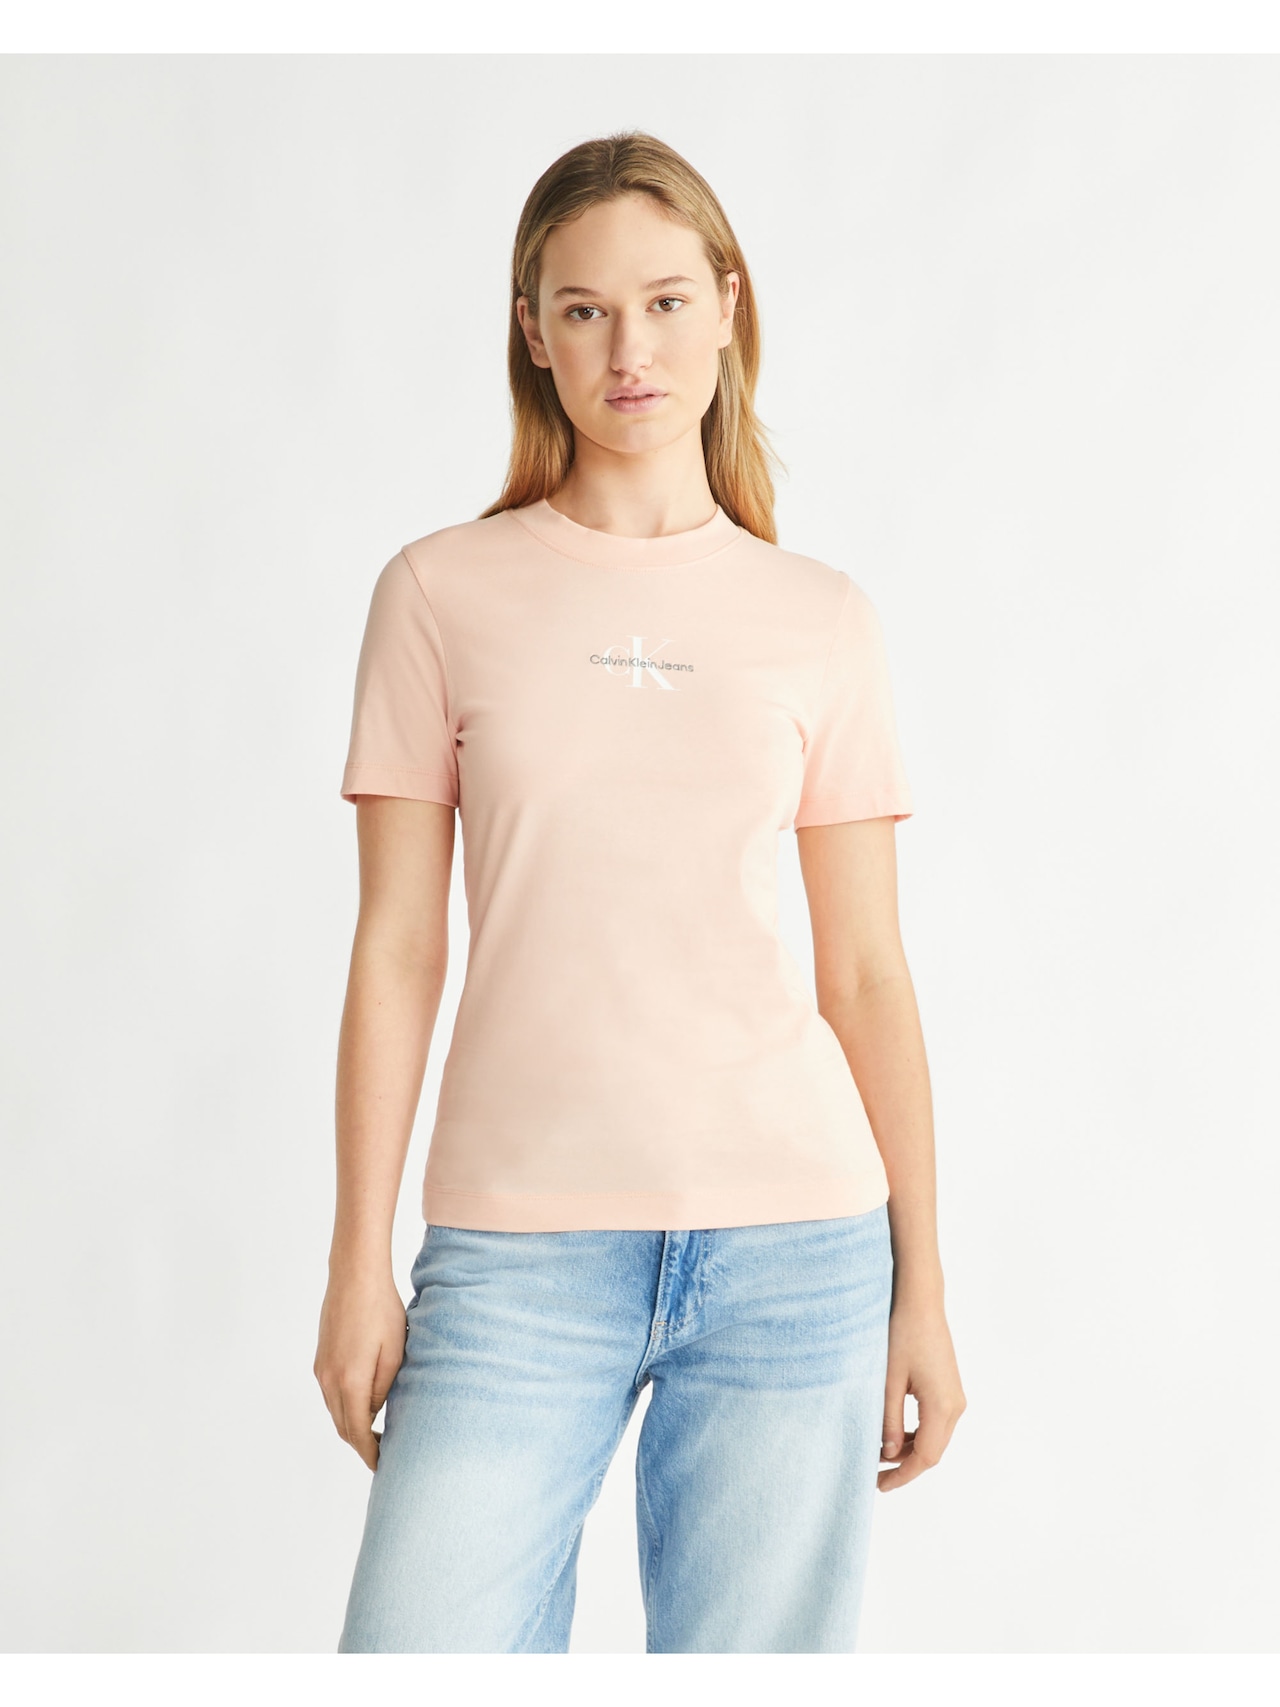 Monologo Slim Fit Tee In Faint Blossom - Just Jeans Online